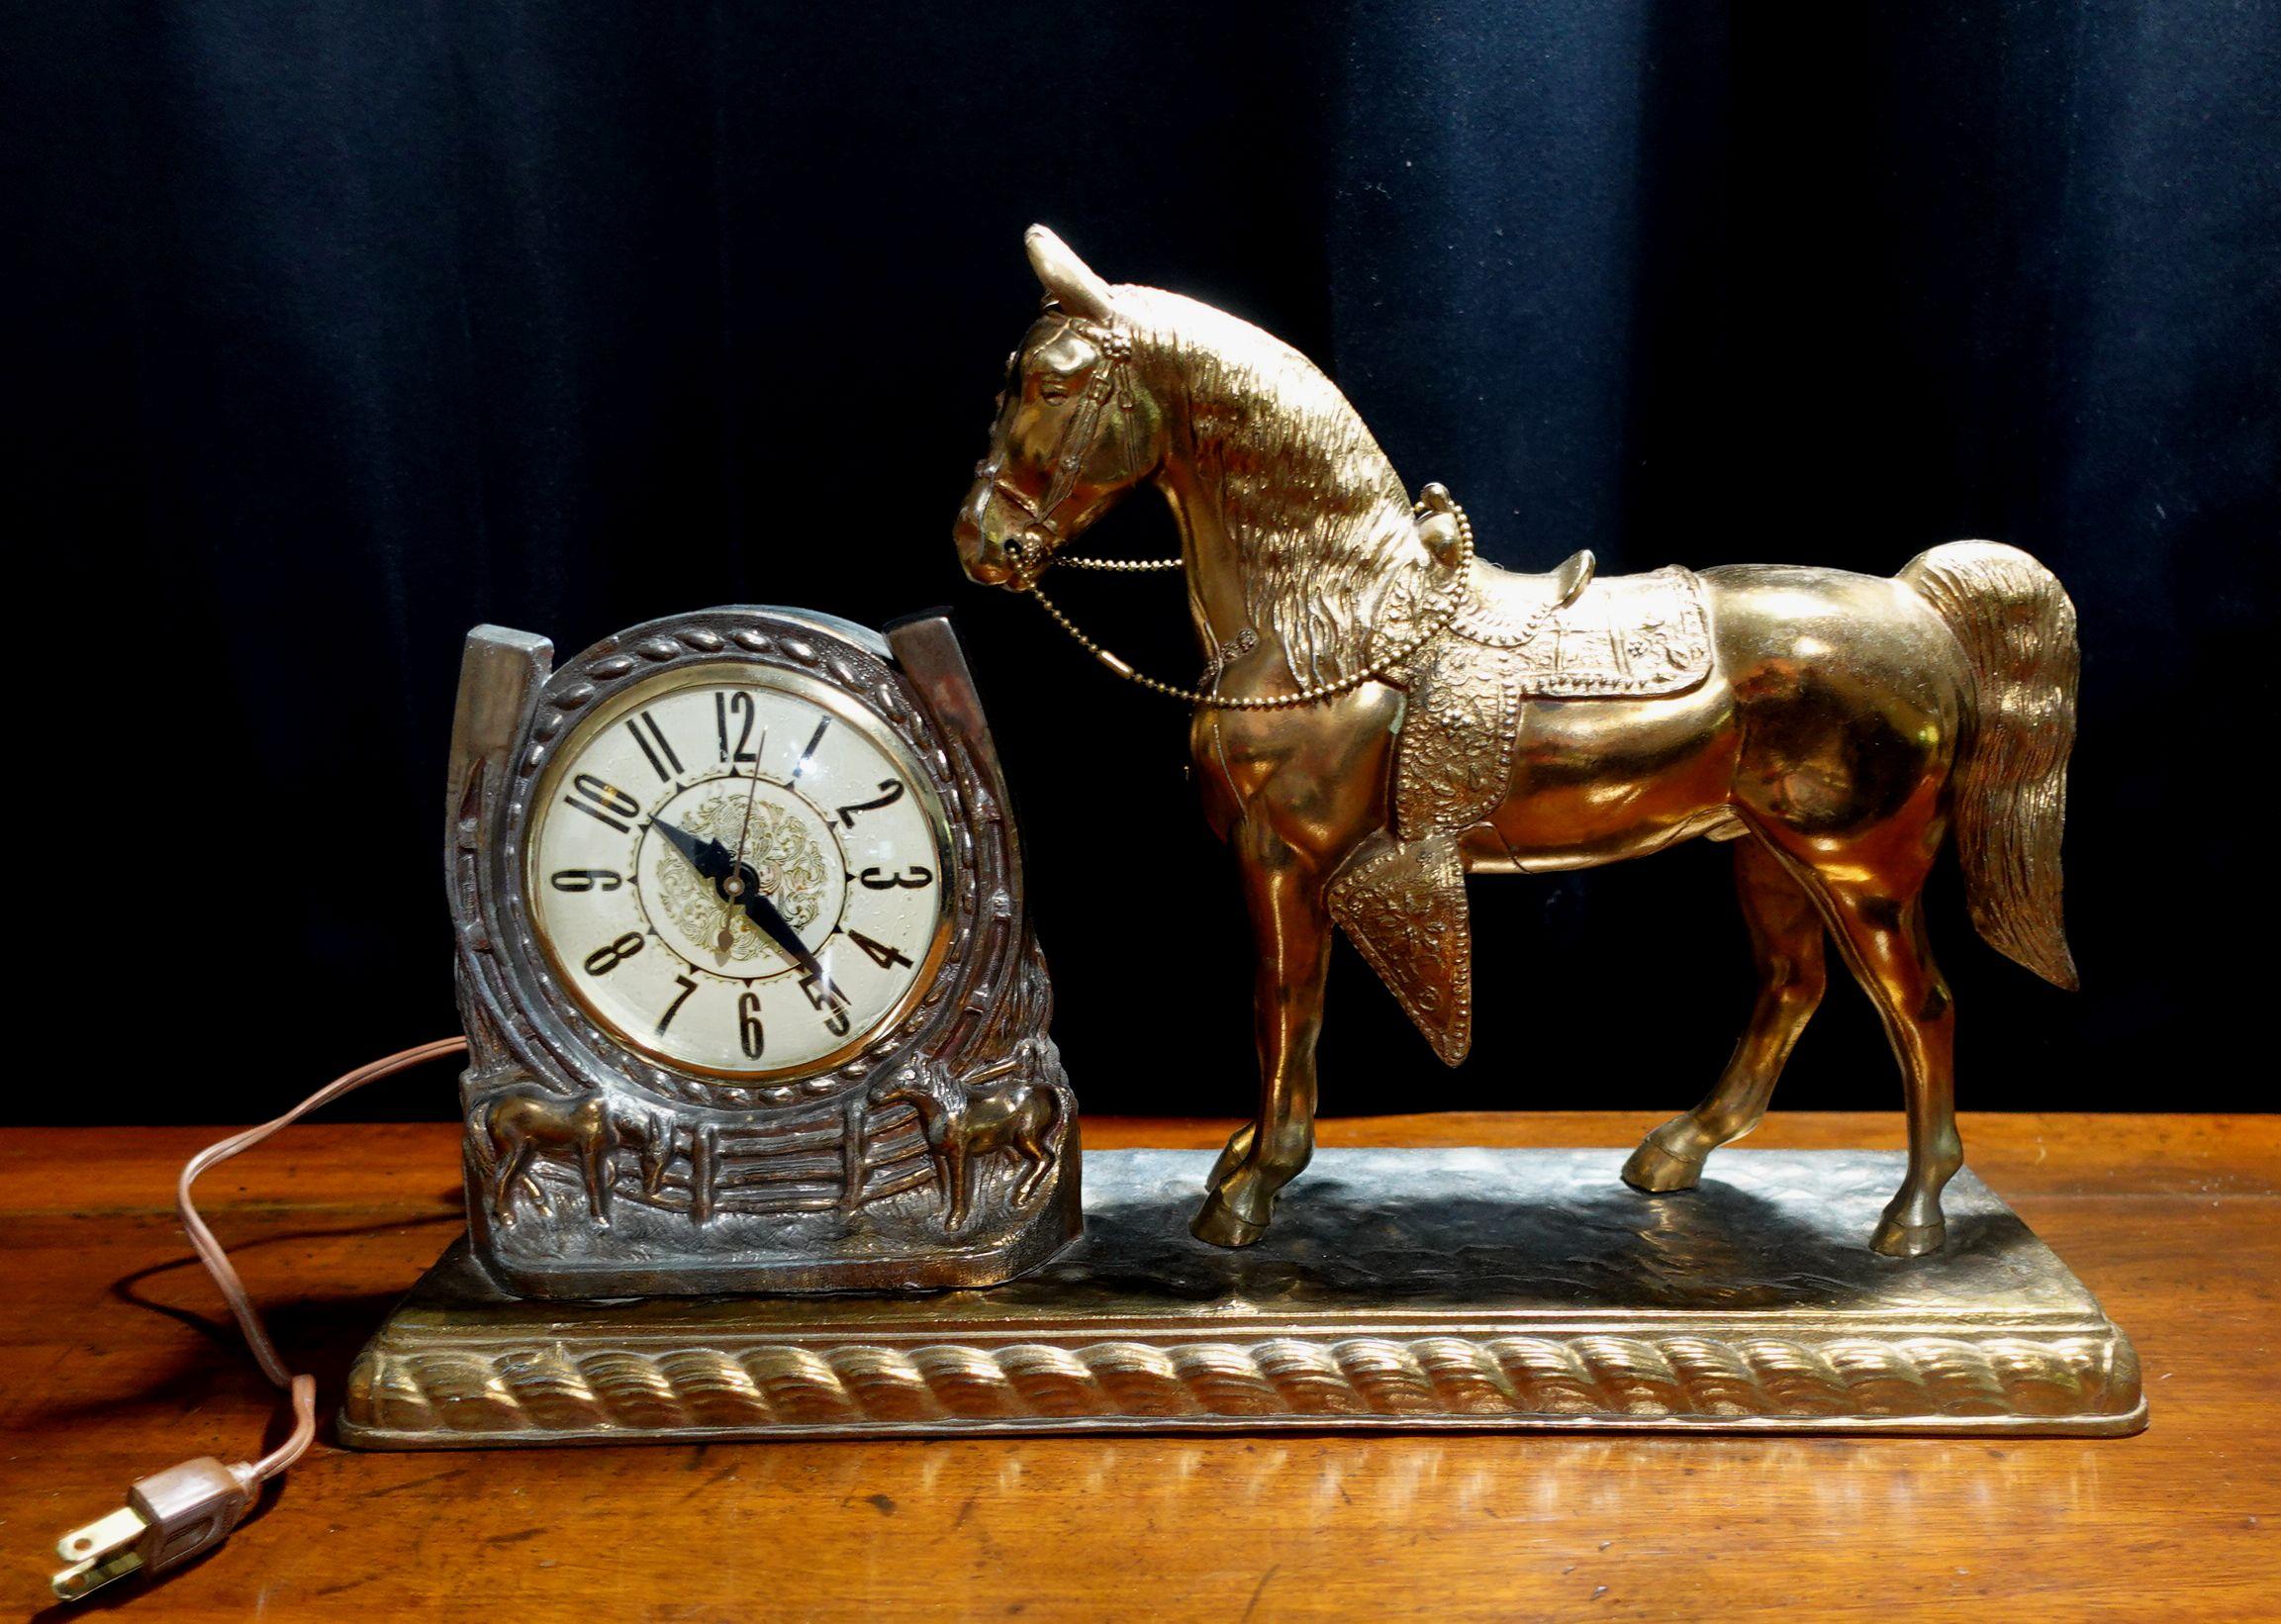 A beautiful Horse Mental Clock. It's electrical and runs very accurately. It depicts a large standing golden horse right next to the clock and becomes a charming decorative object with the time displaying function.